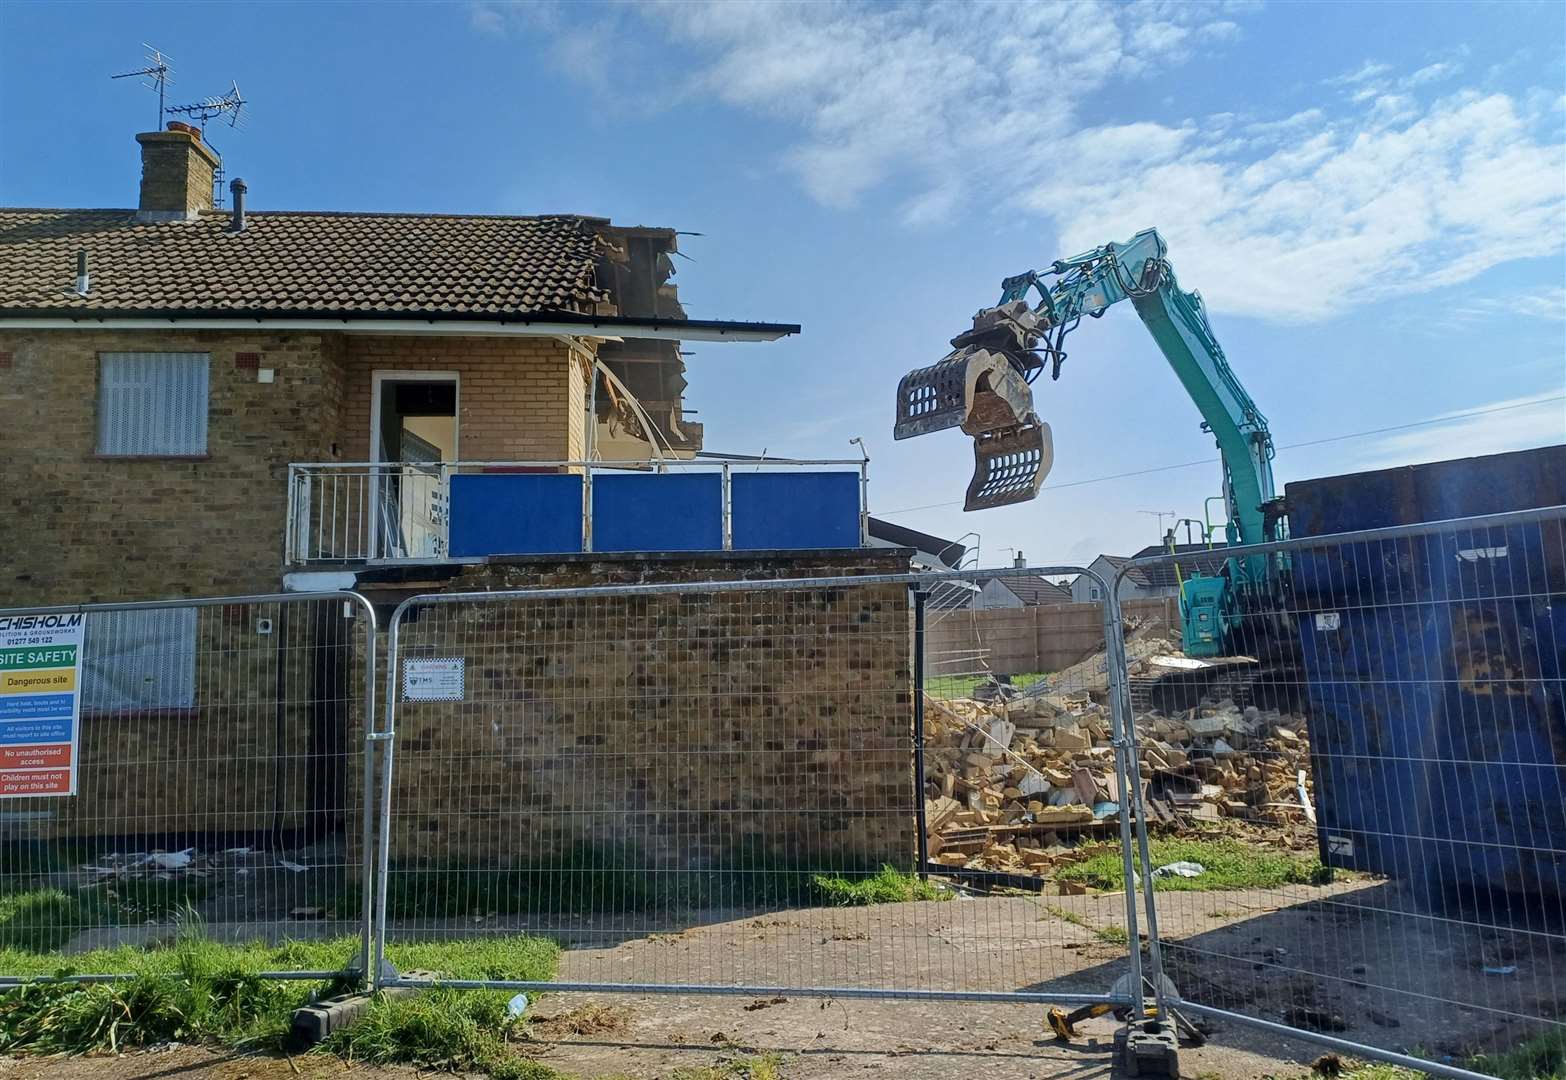 Demolition has started on Cambridge Crescent in Shepway. Picture: Cara Simmonds